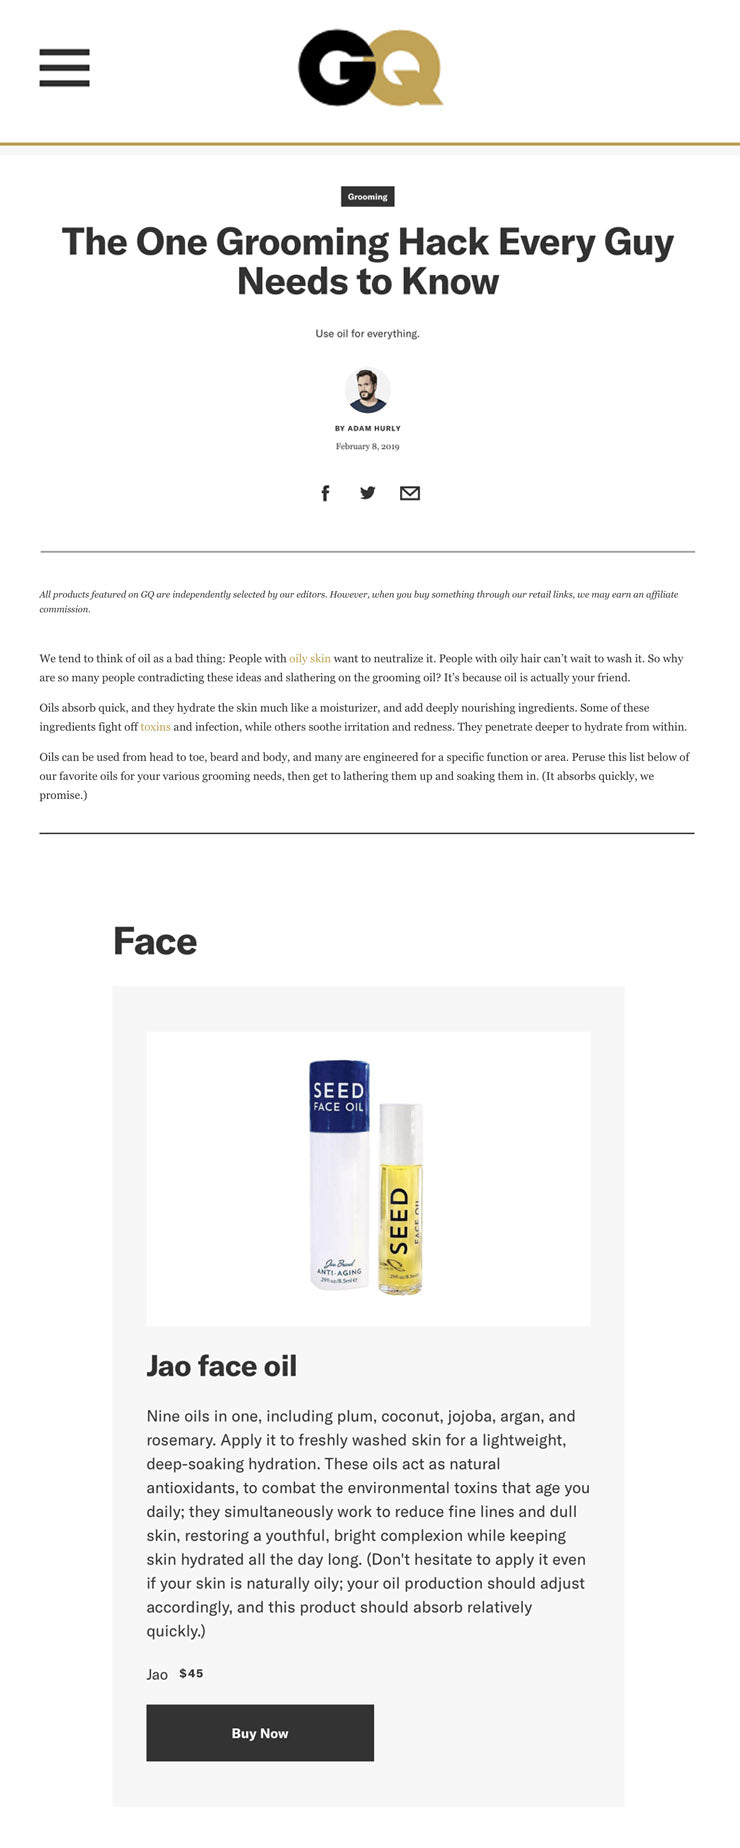 GQ: Jao Seed Face Oil The One Grooming Hack Every Guy Needs to Know